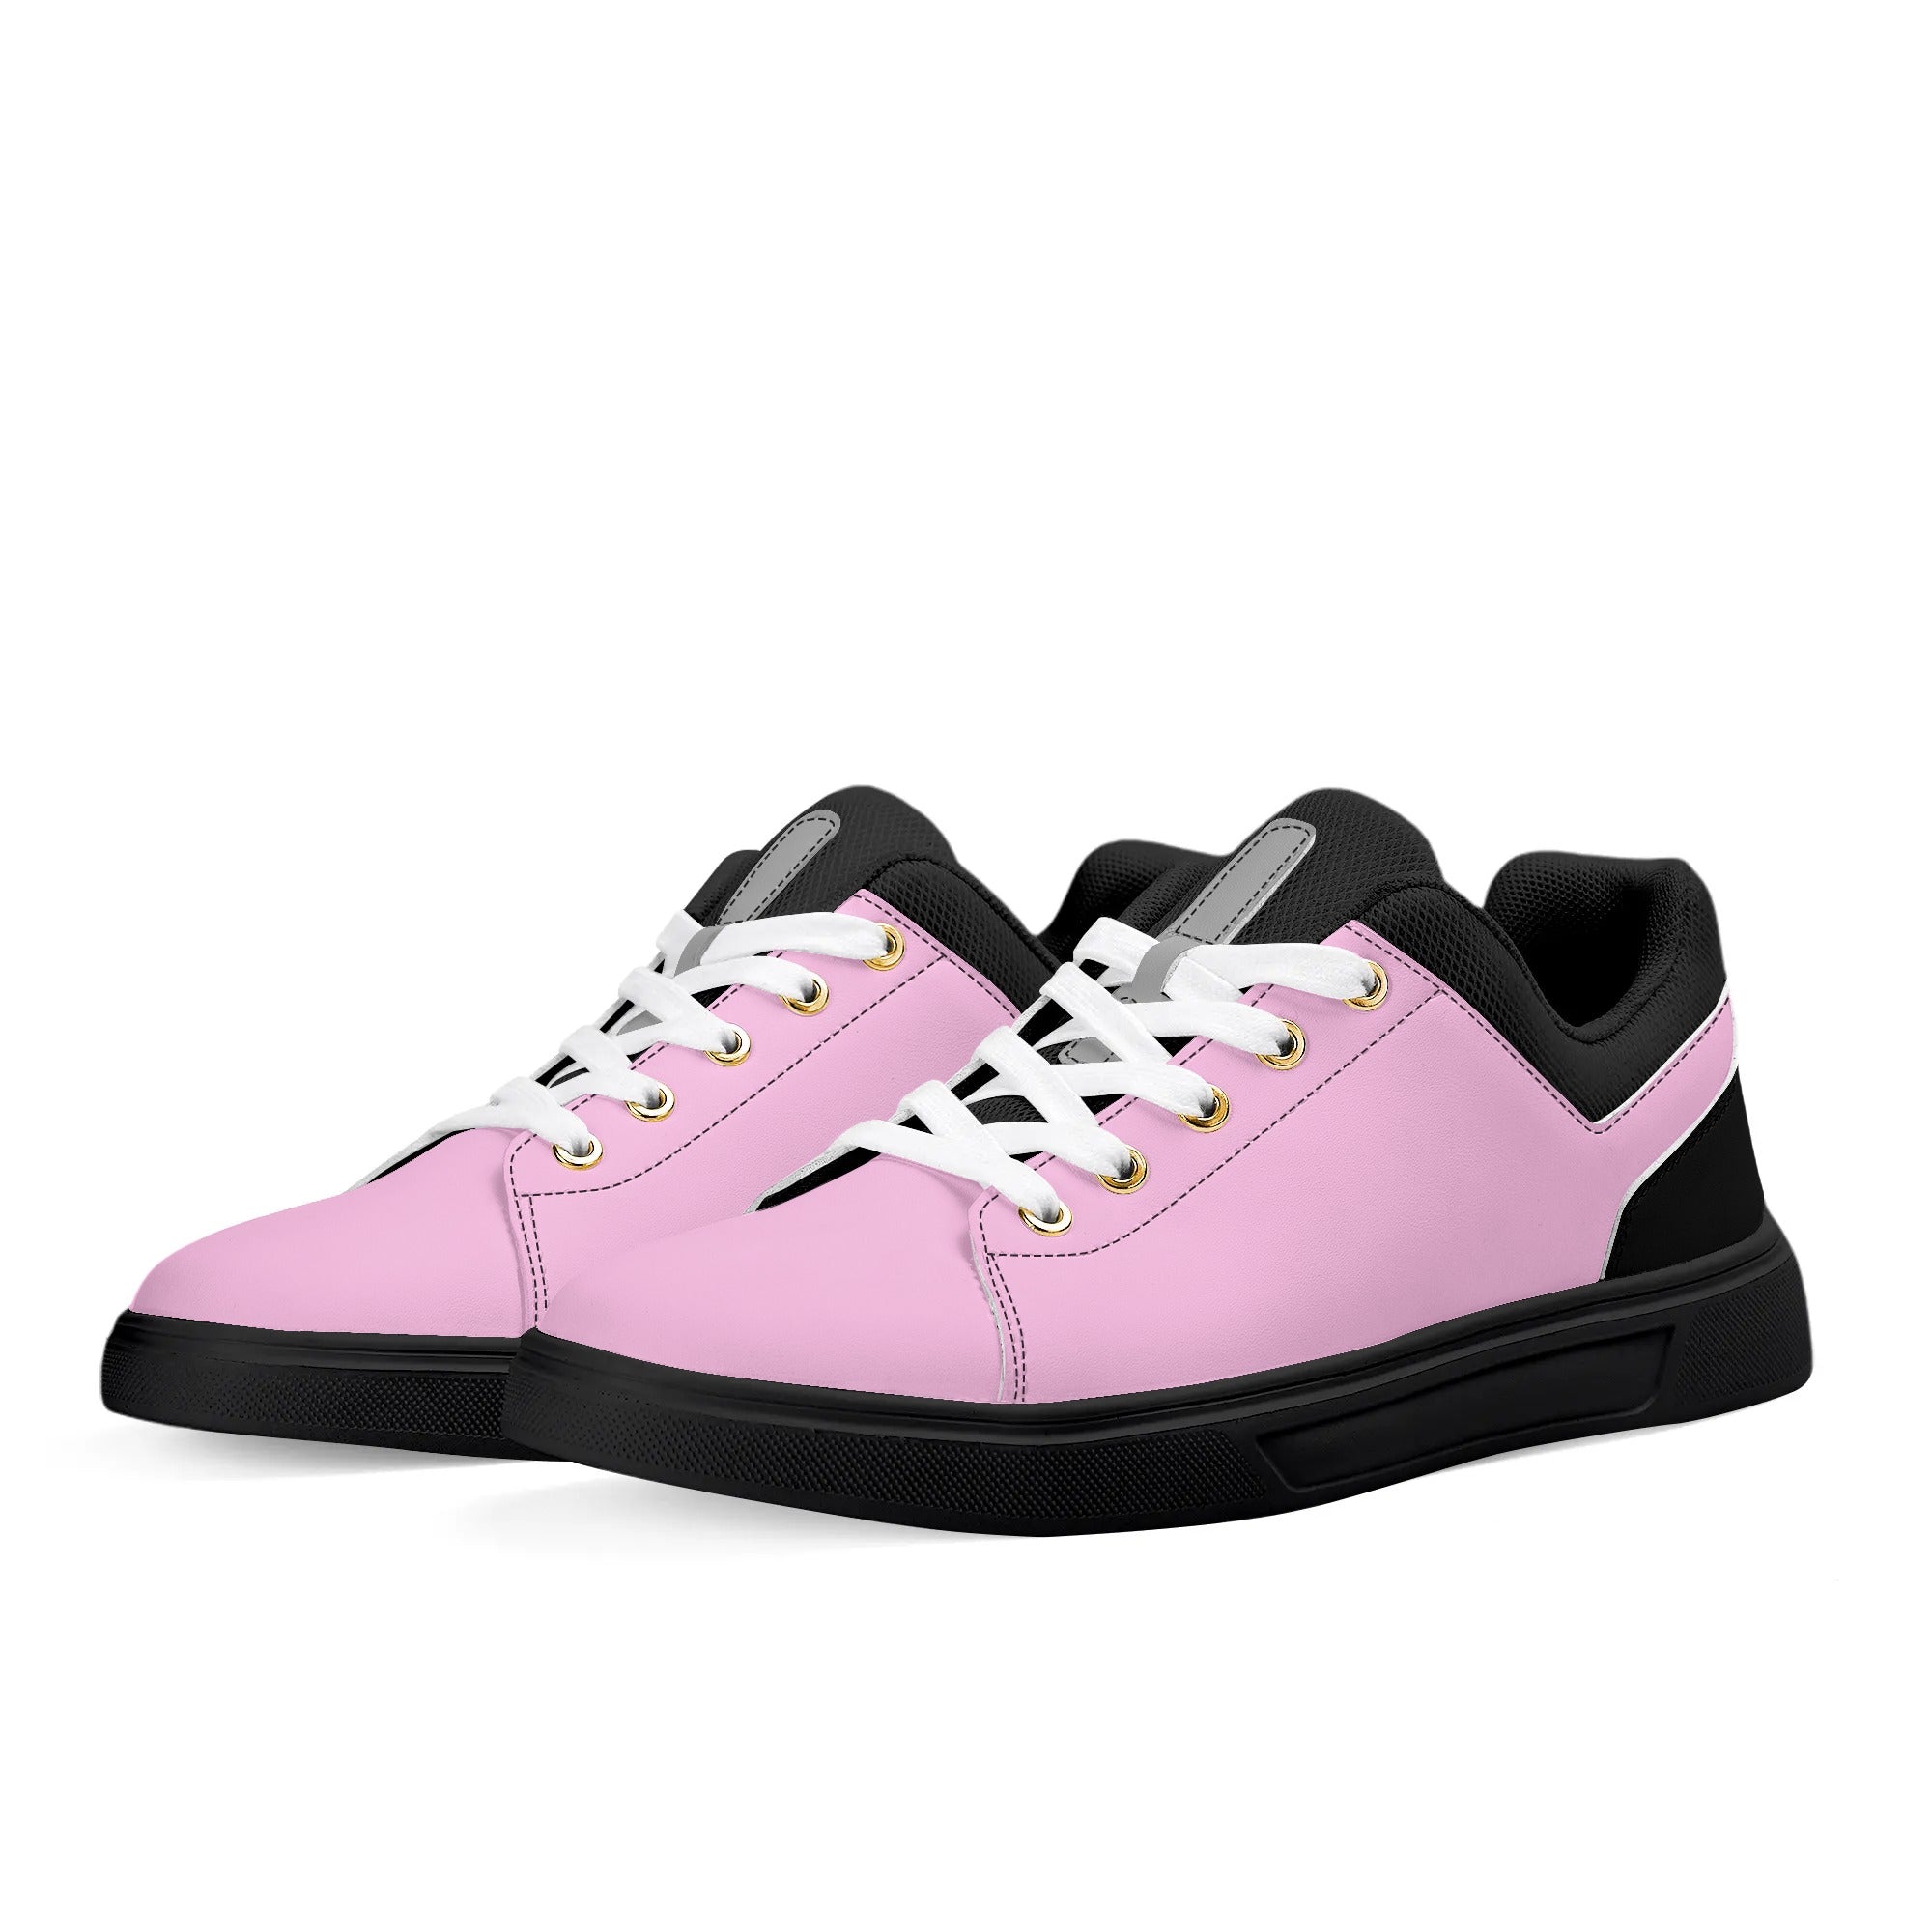 Black - Pink Unisex Lightweight Brand Low Top PU Mesh Skateboard Shoes - unisex sneakers at TFC&H Co.